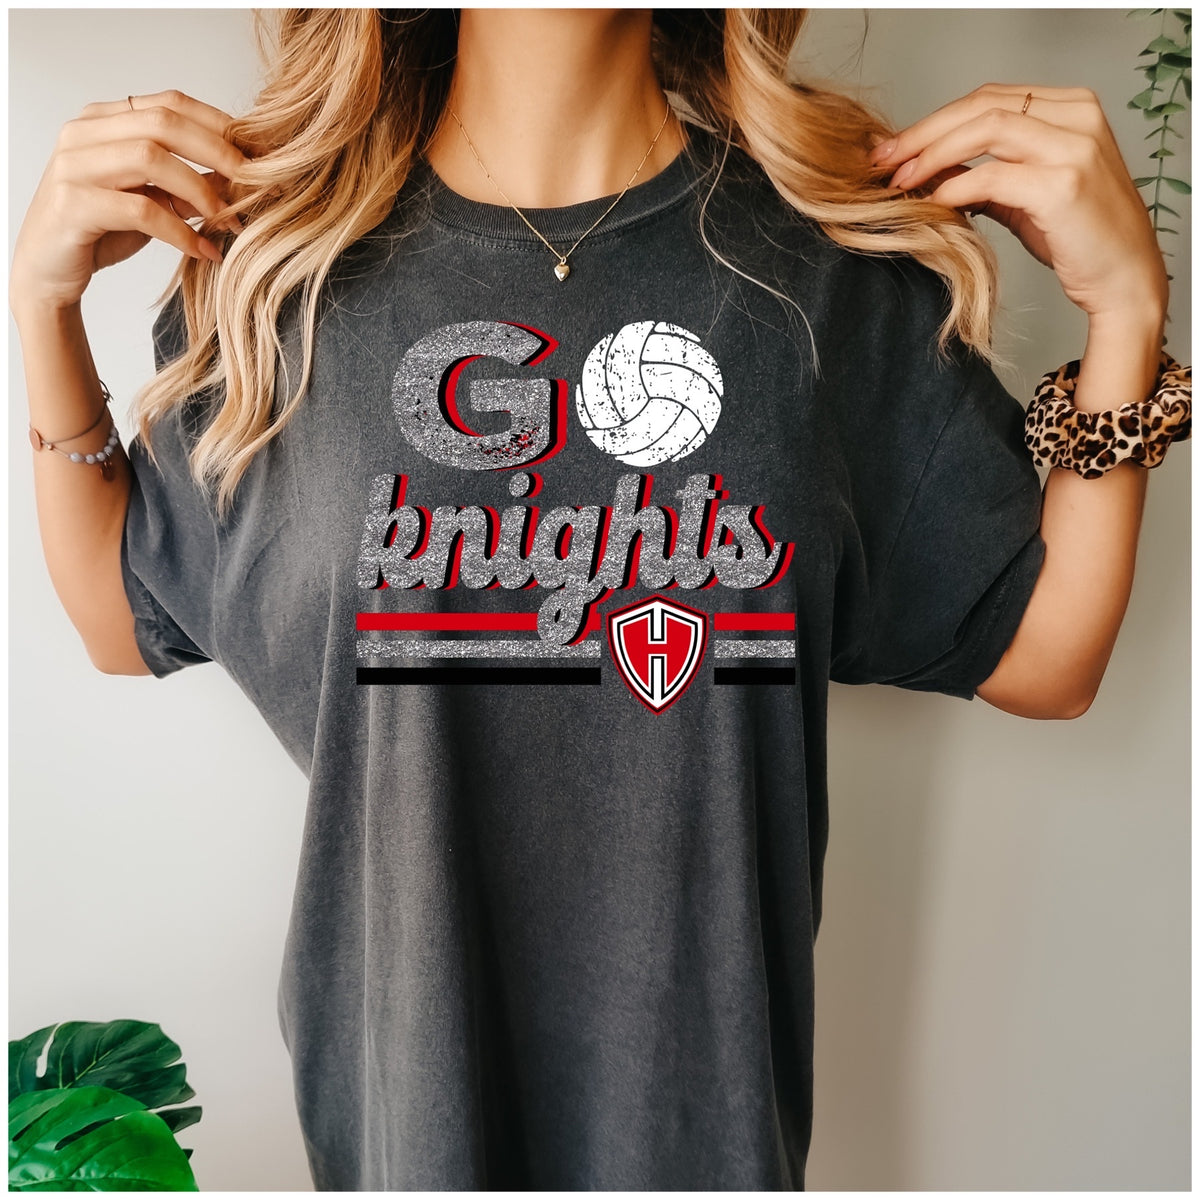 Pink Sequin Chicago White Sox T-Shirt